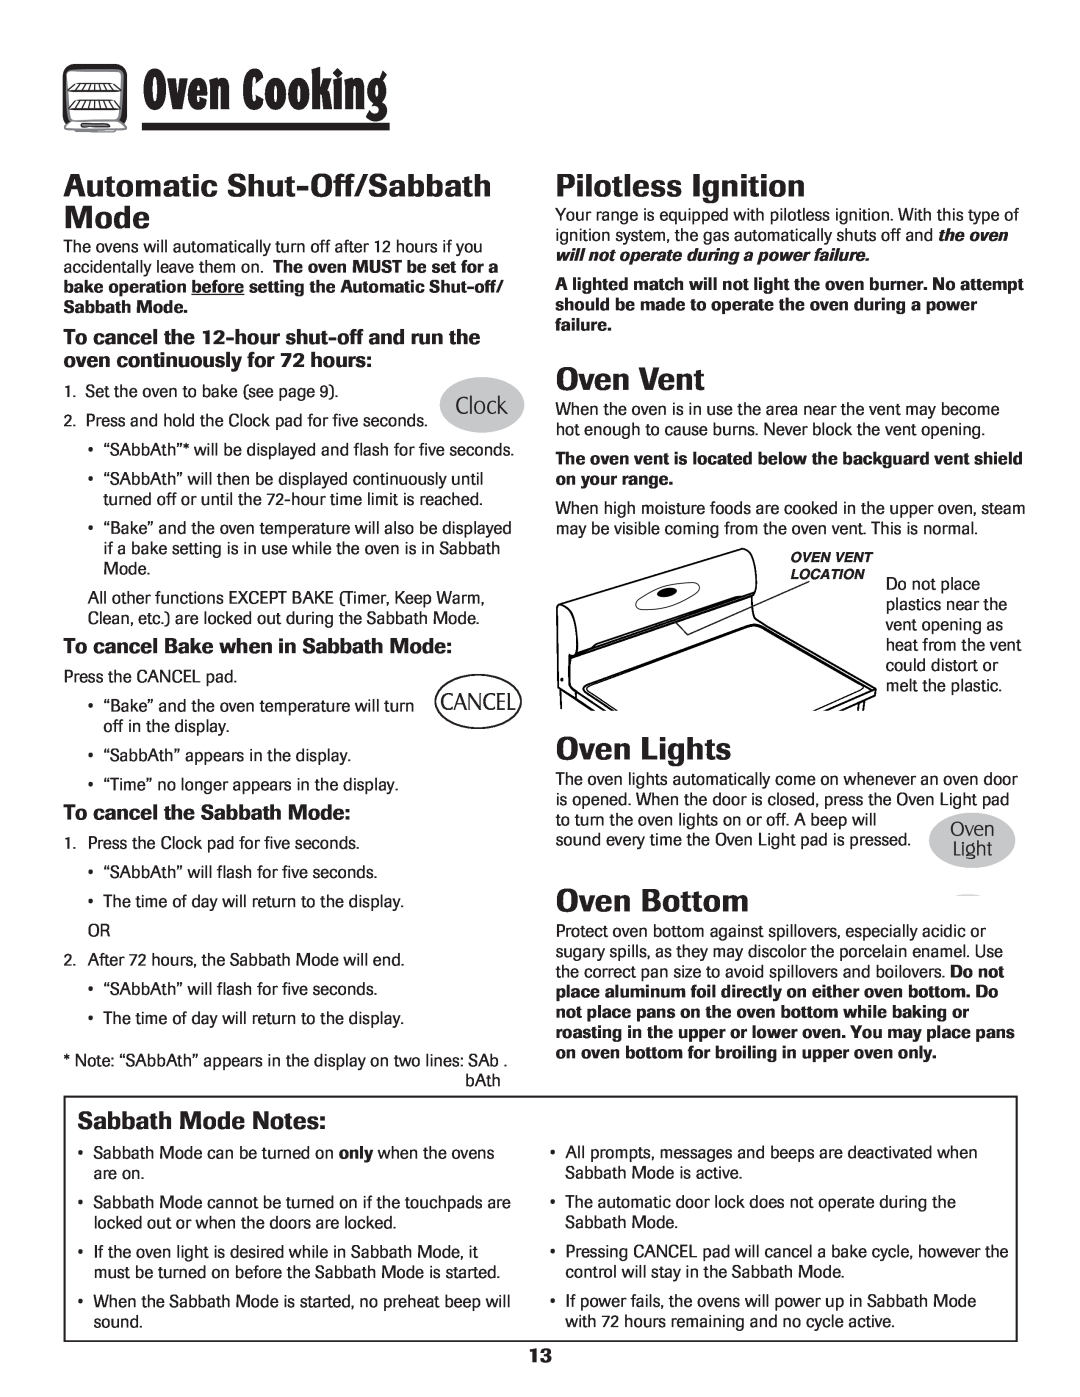 Maytag MGR6751BDW Automatic Shut-Off/SabbathMode, Oven Vent, Oven Lights, Oven Bottom, Sabbath Mode Notes, Oven Cooking 